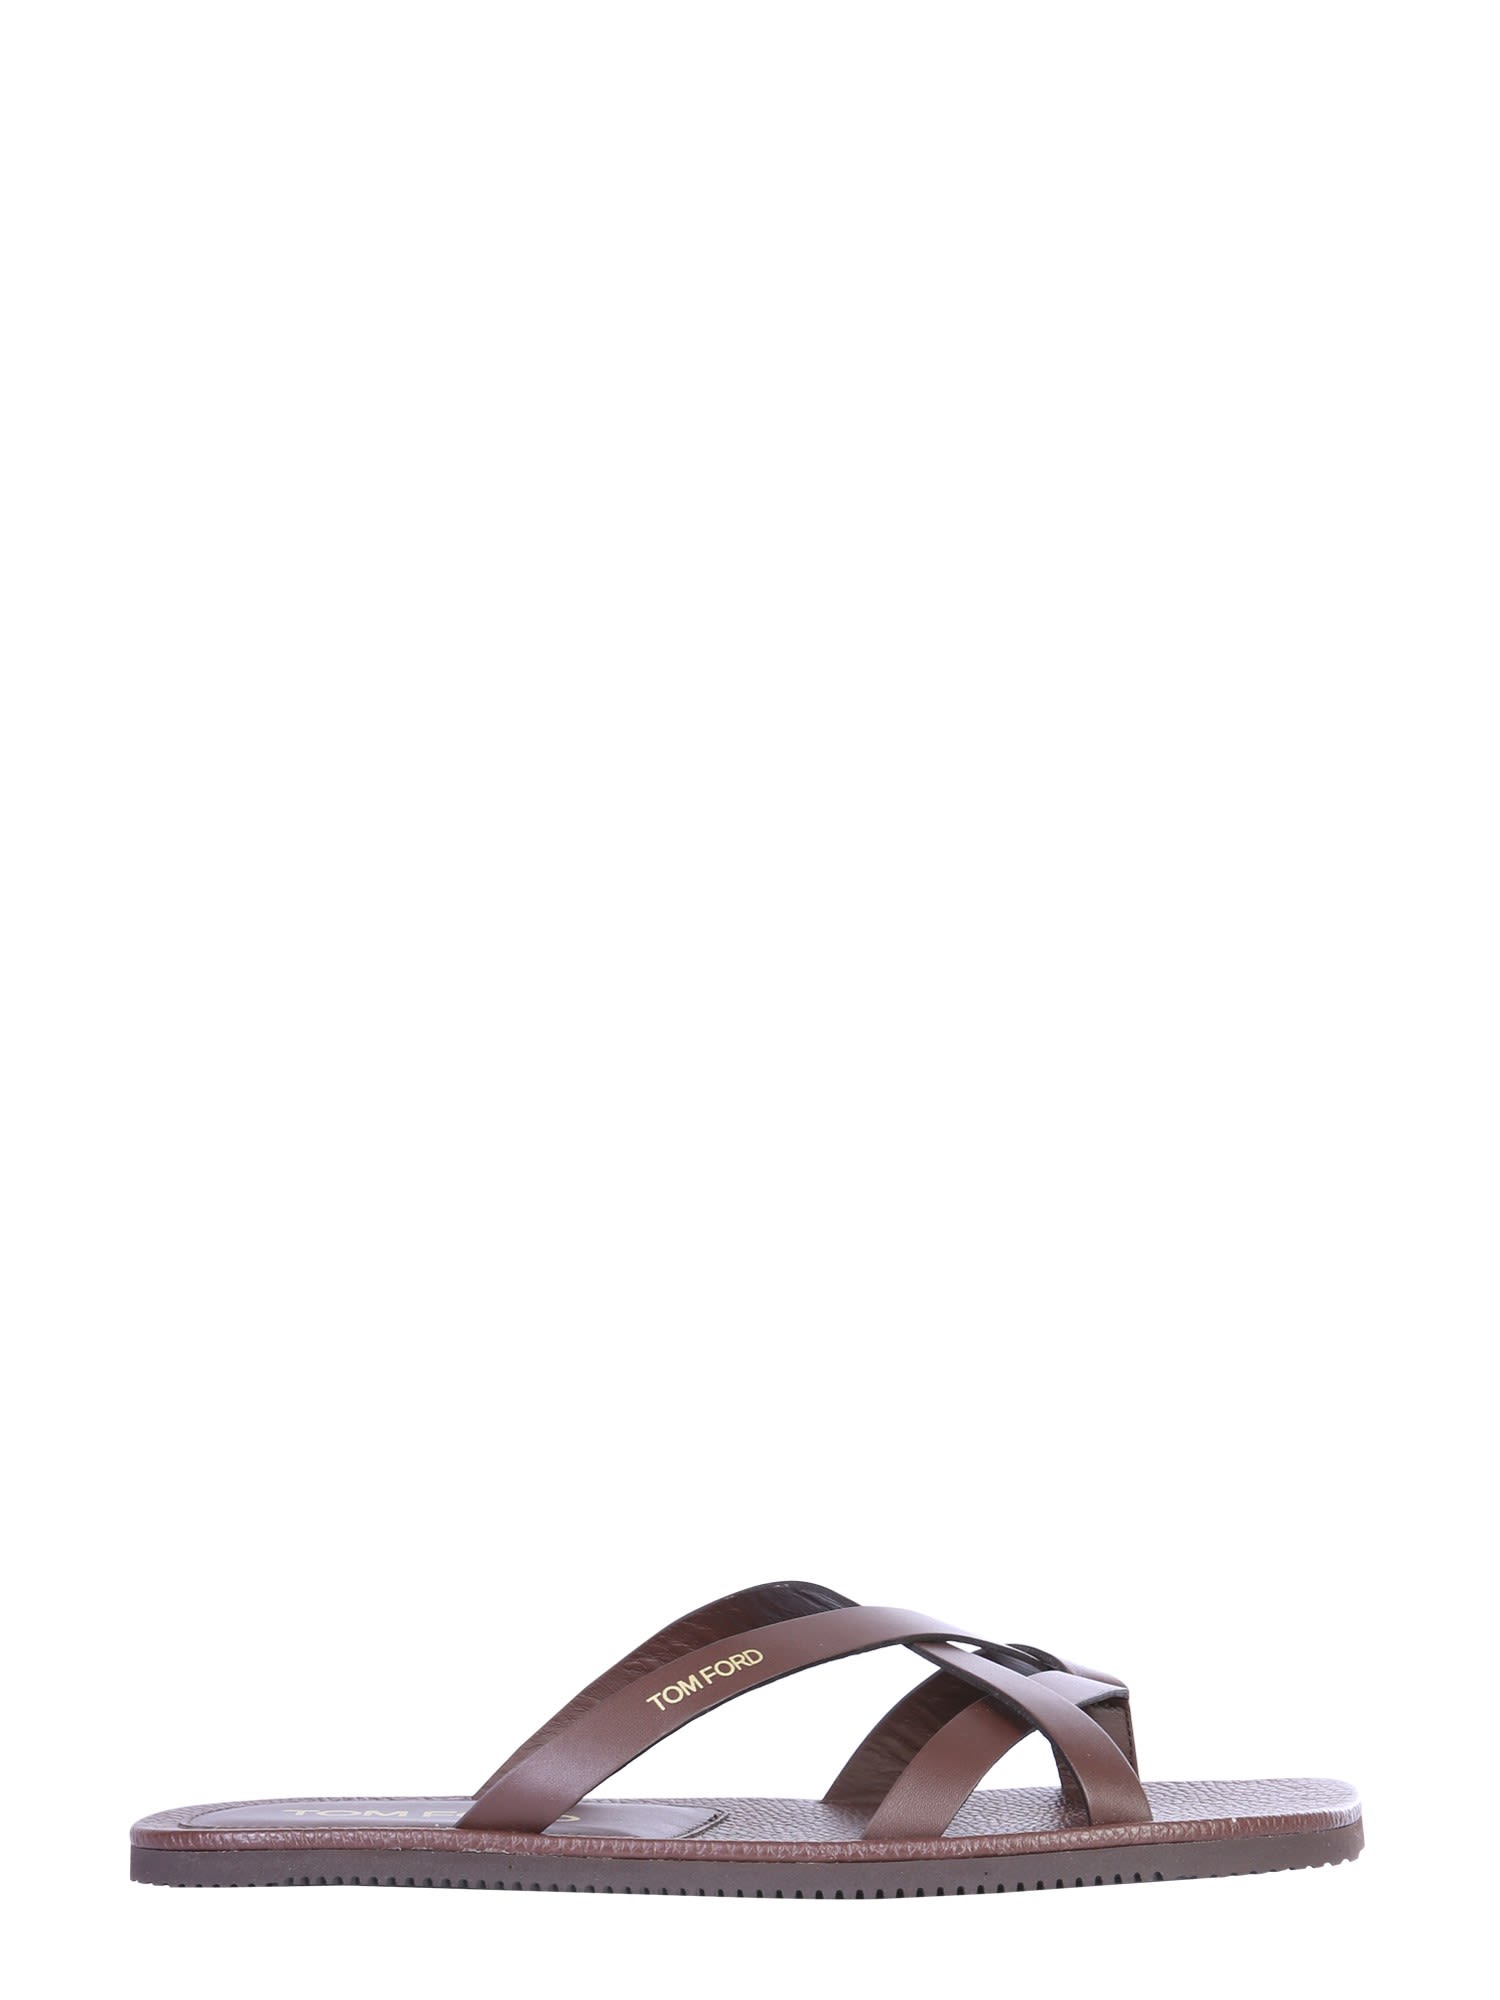 TOM FORD SANDALS WITH LOGO,11296738